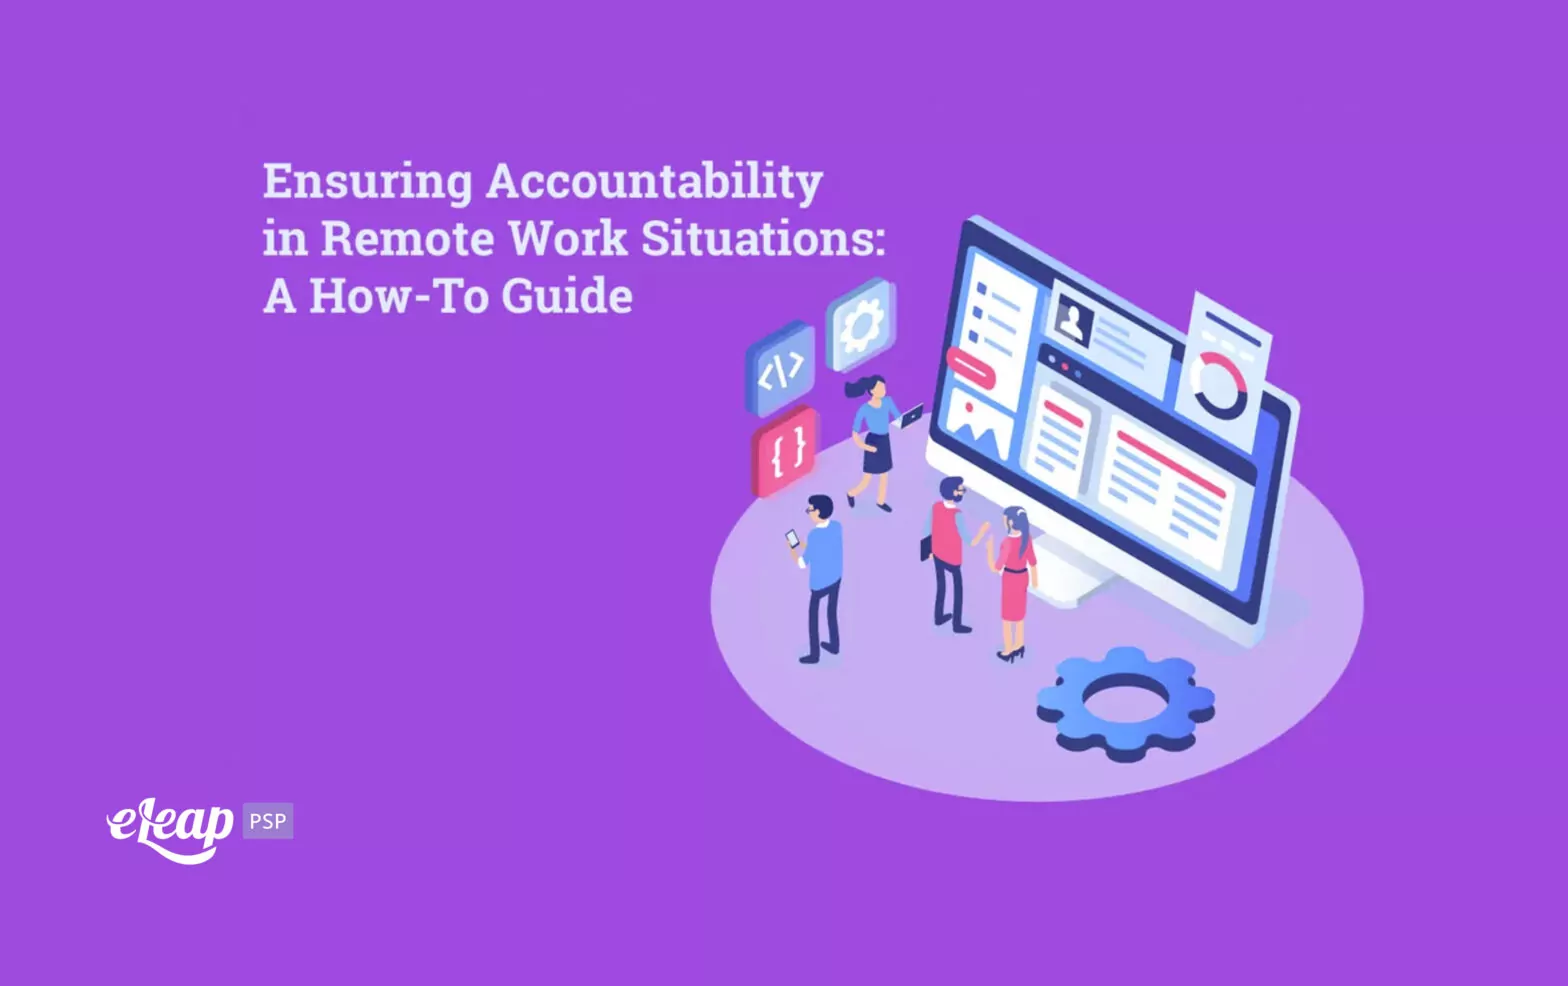 Ensuring Accountability in Remote Work Situations: A How-To Guide